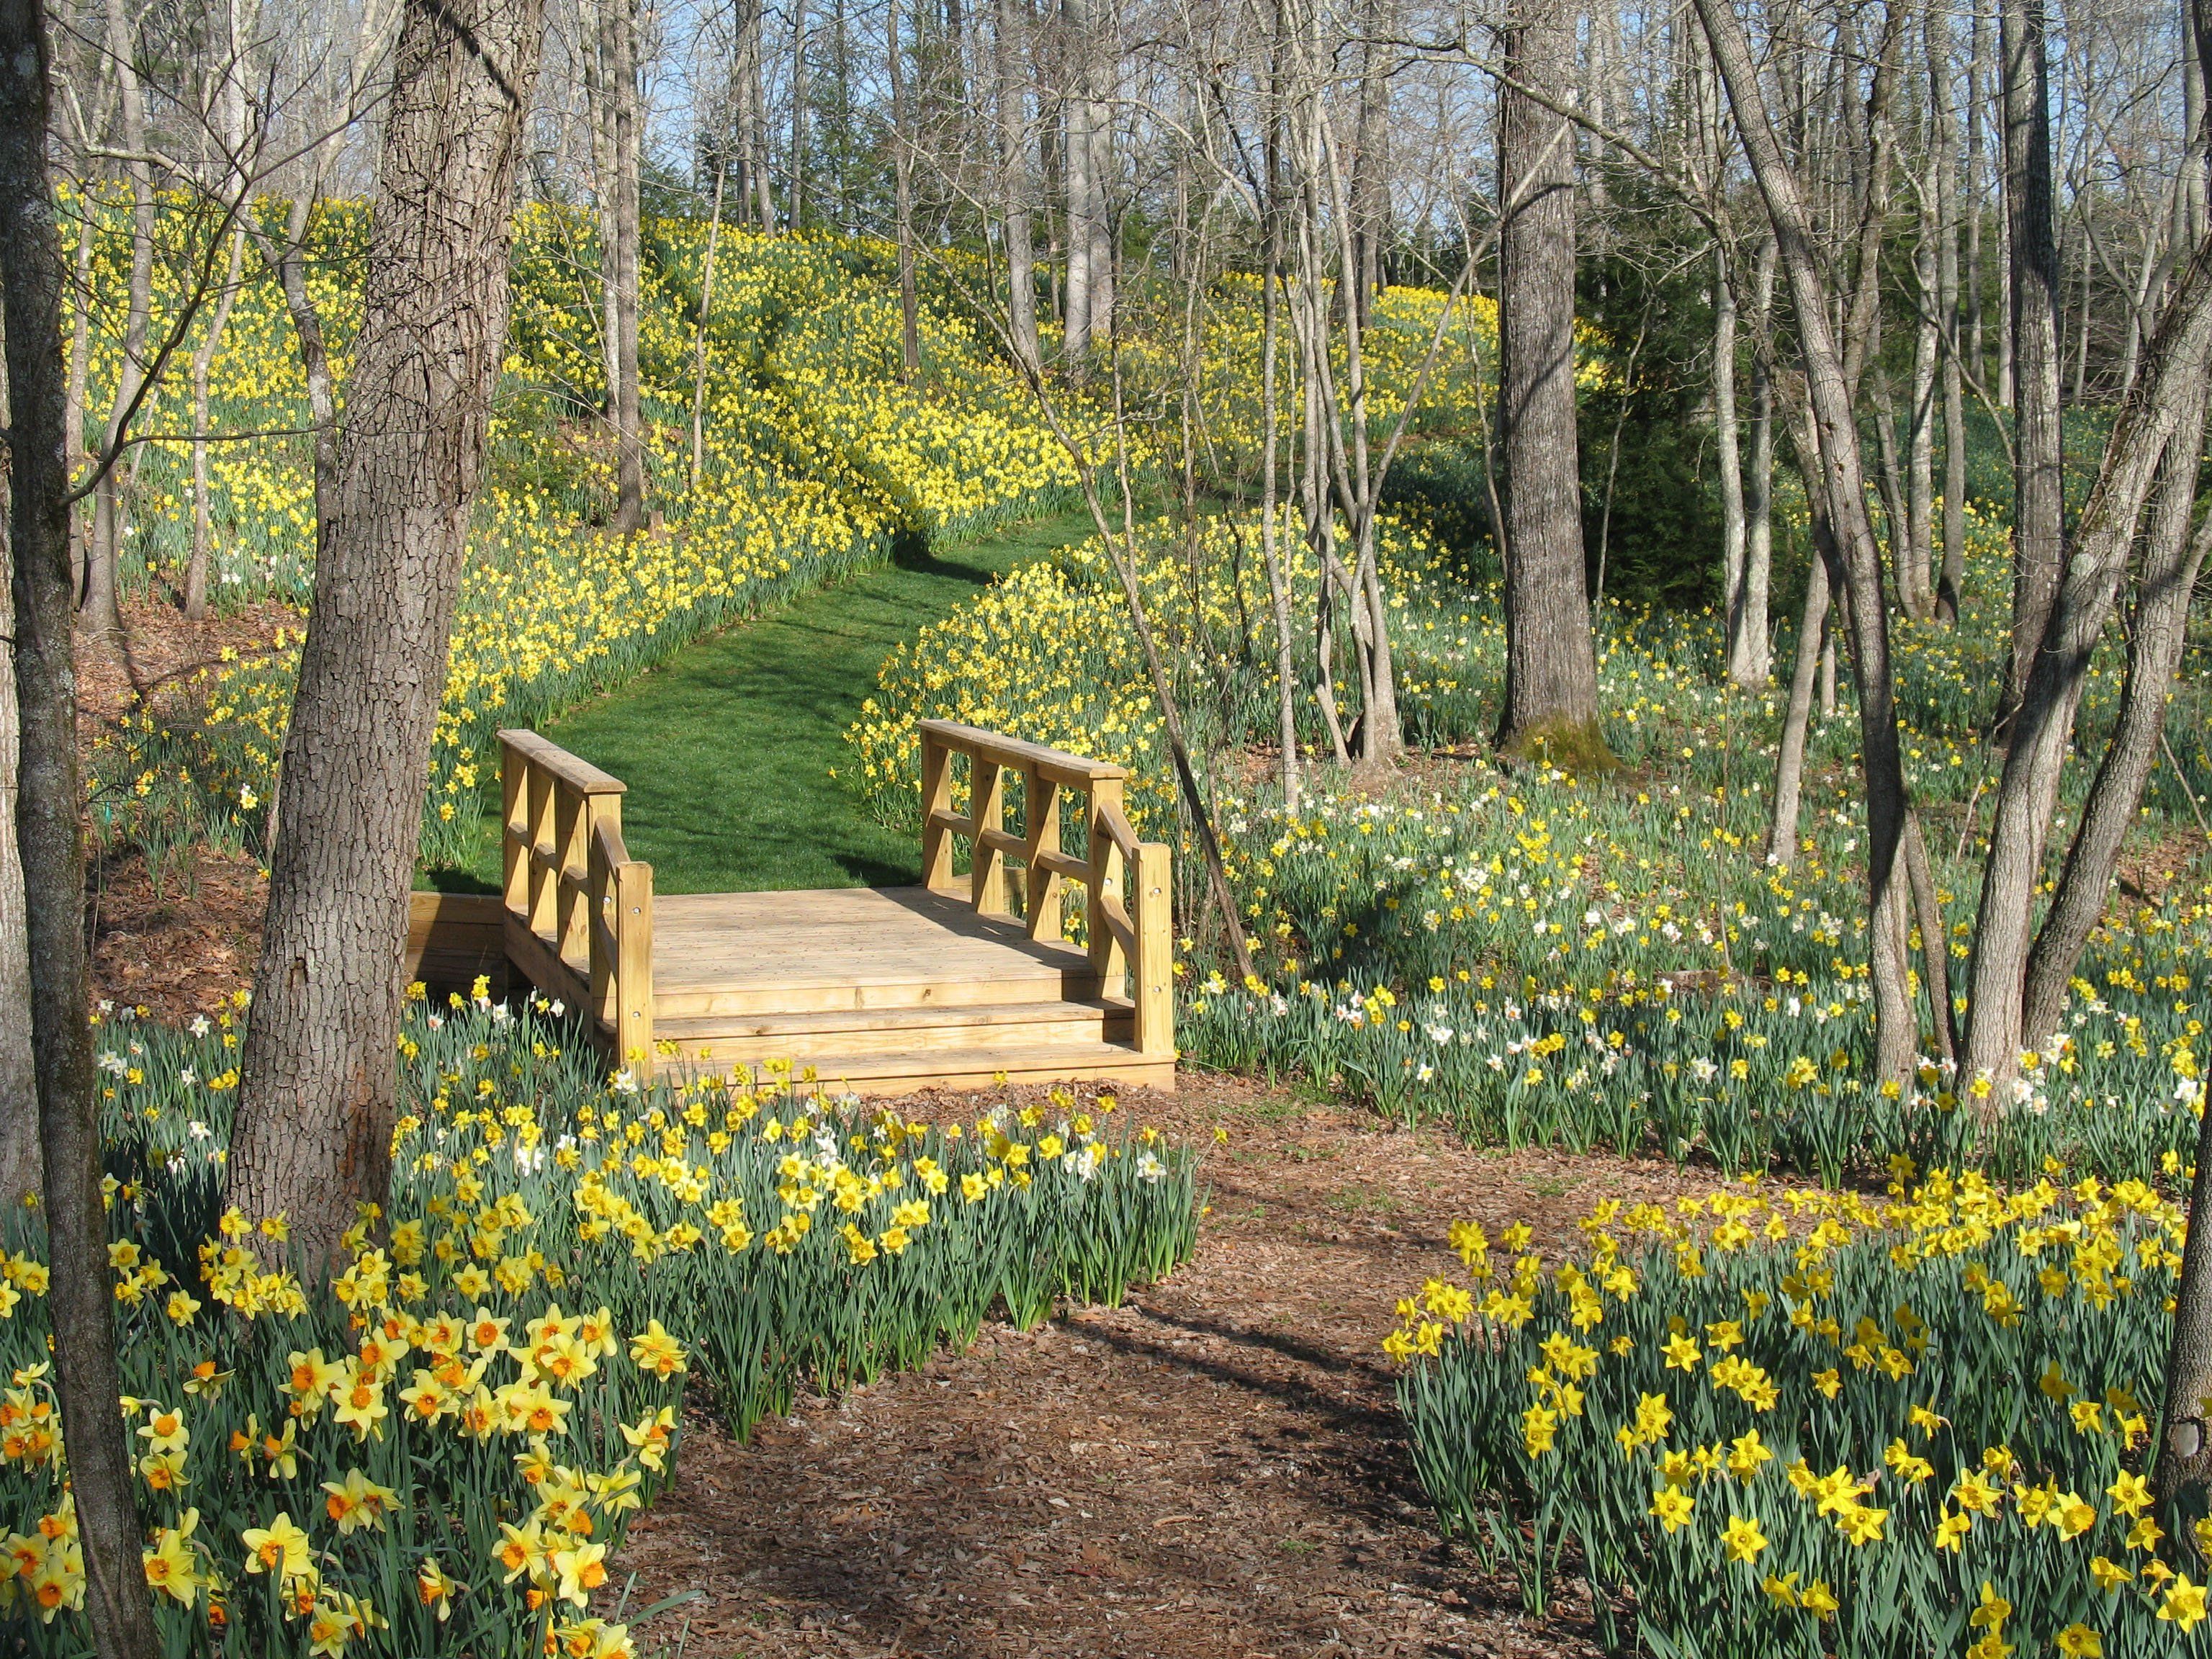 A wooden bridge crosses a small stream as part of a grassy path blanketed with yellow daffodils